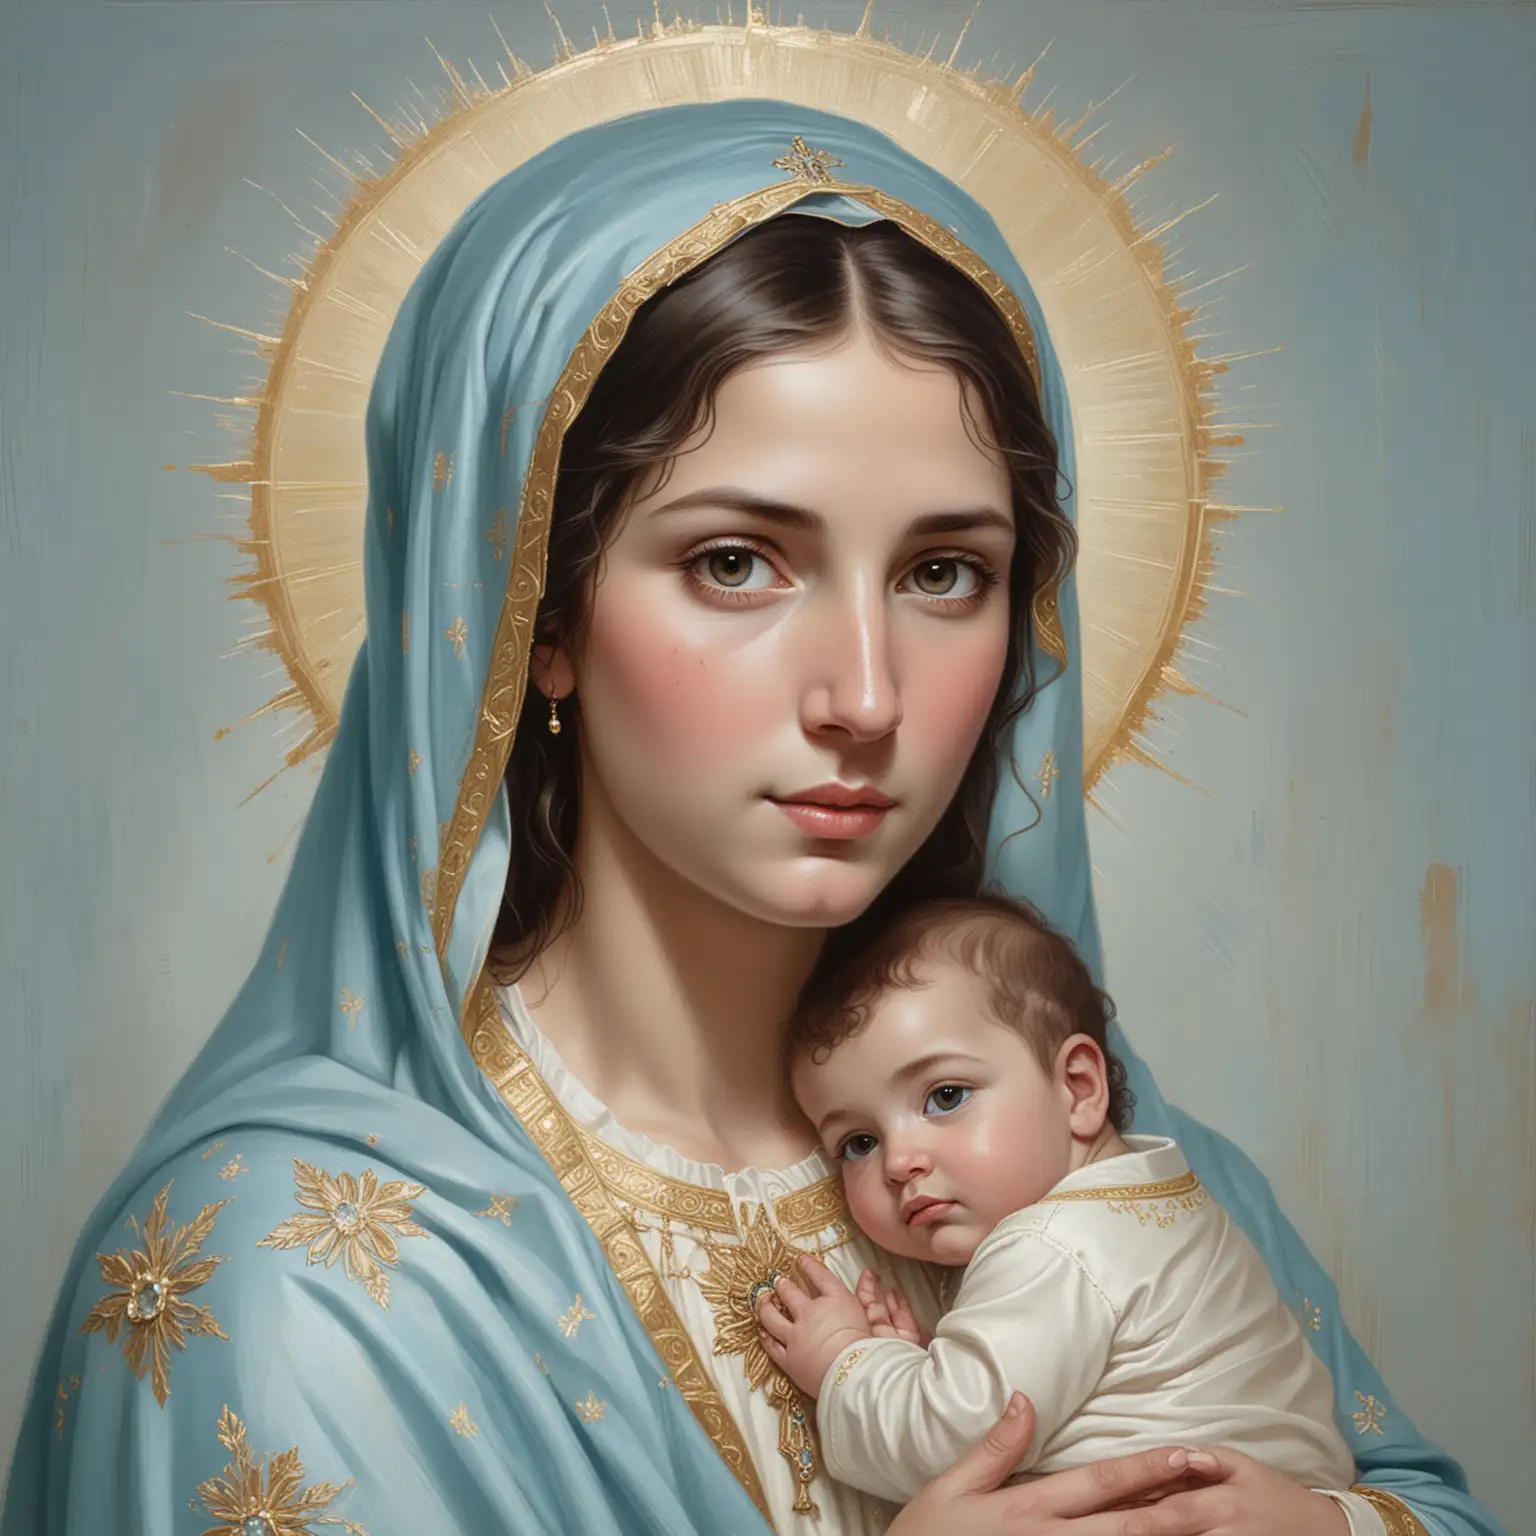 Young Virgin Mary in Light Blue Holding Baby Jesus